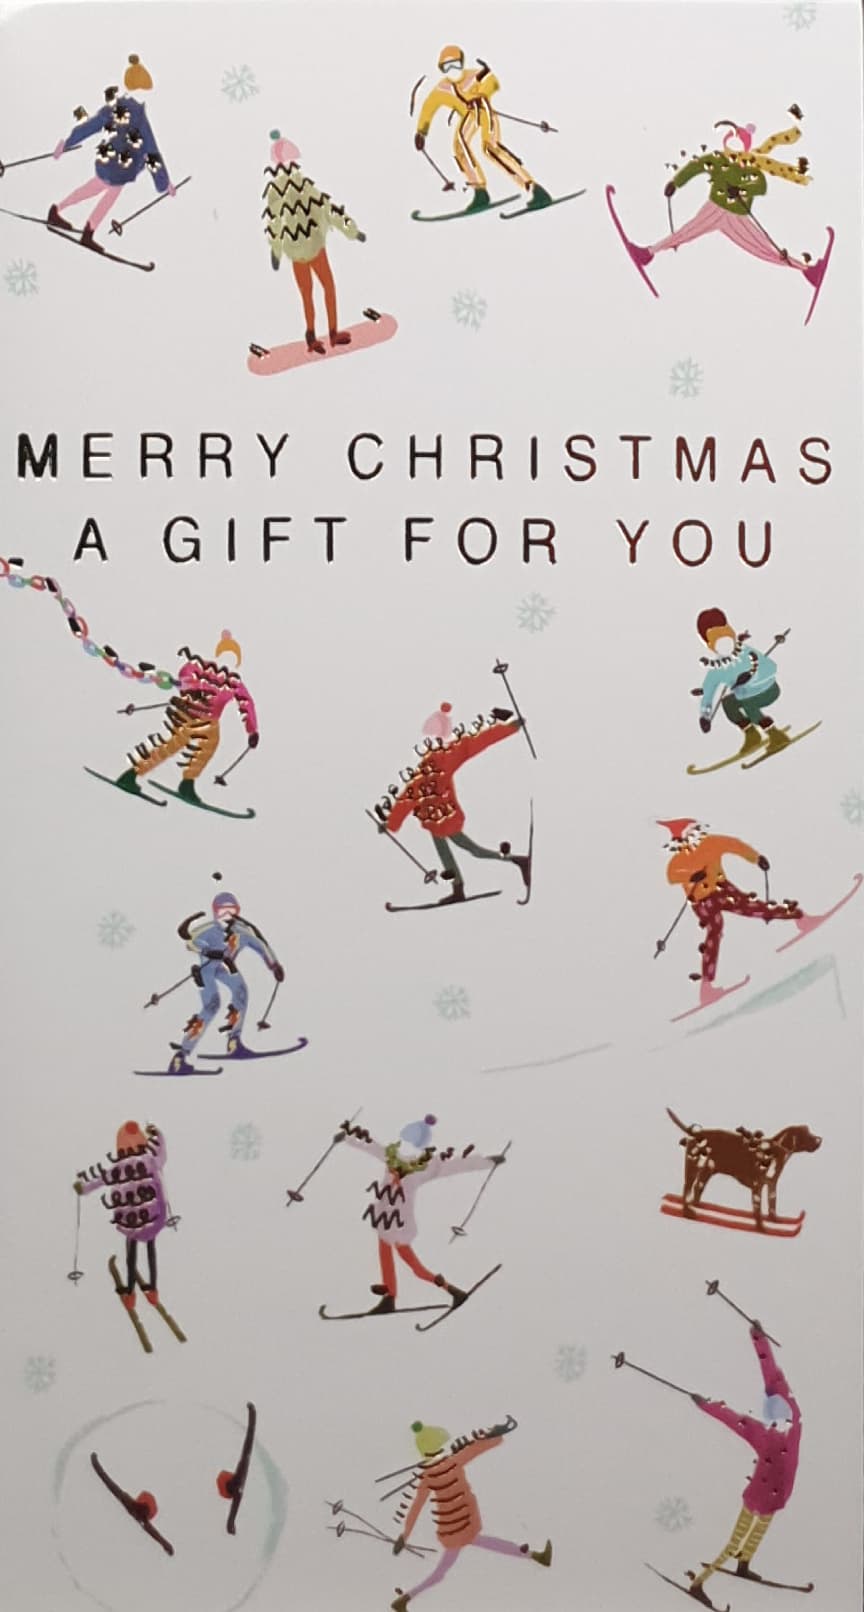 Money Wallet Christmas Card - A Gift For You / People Skiing Having Fun